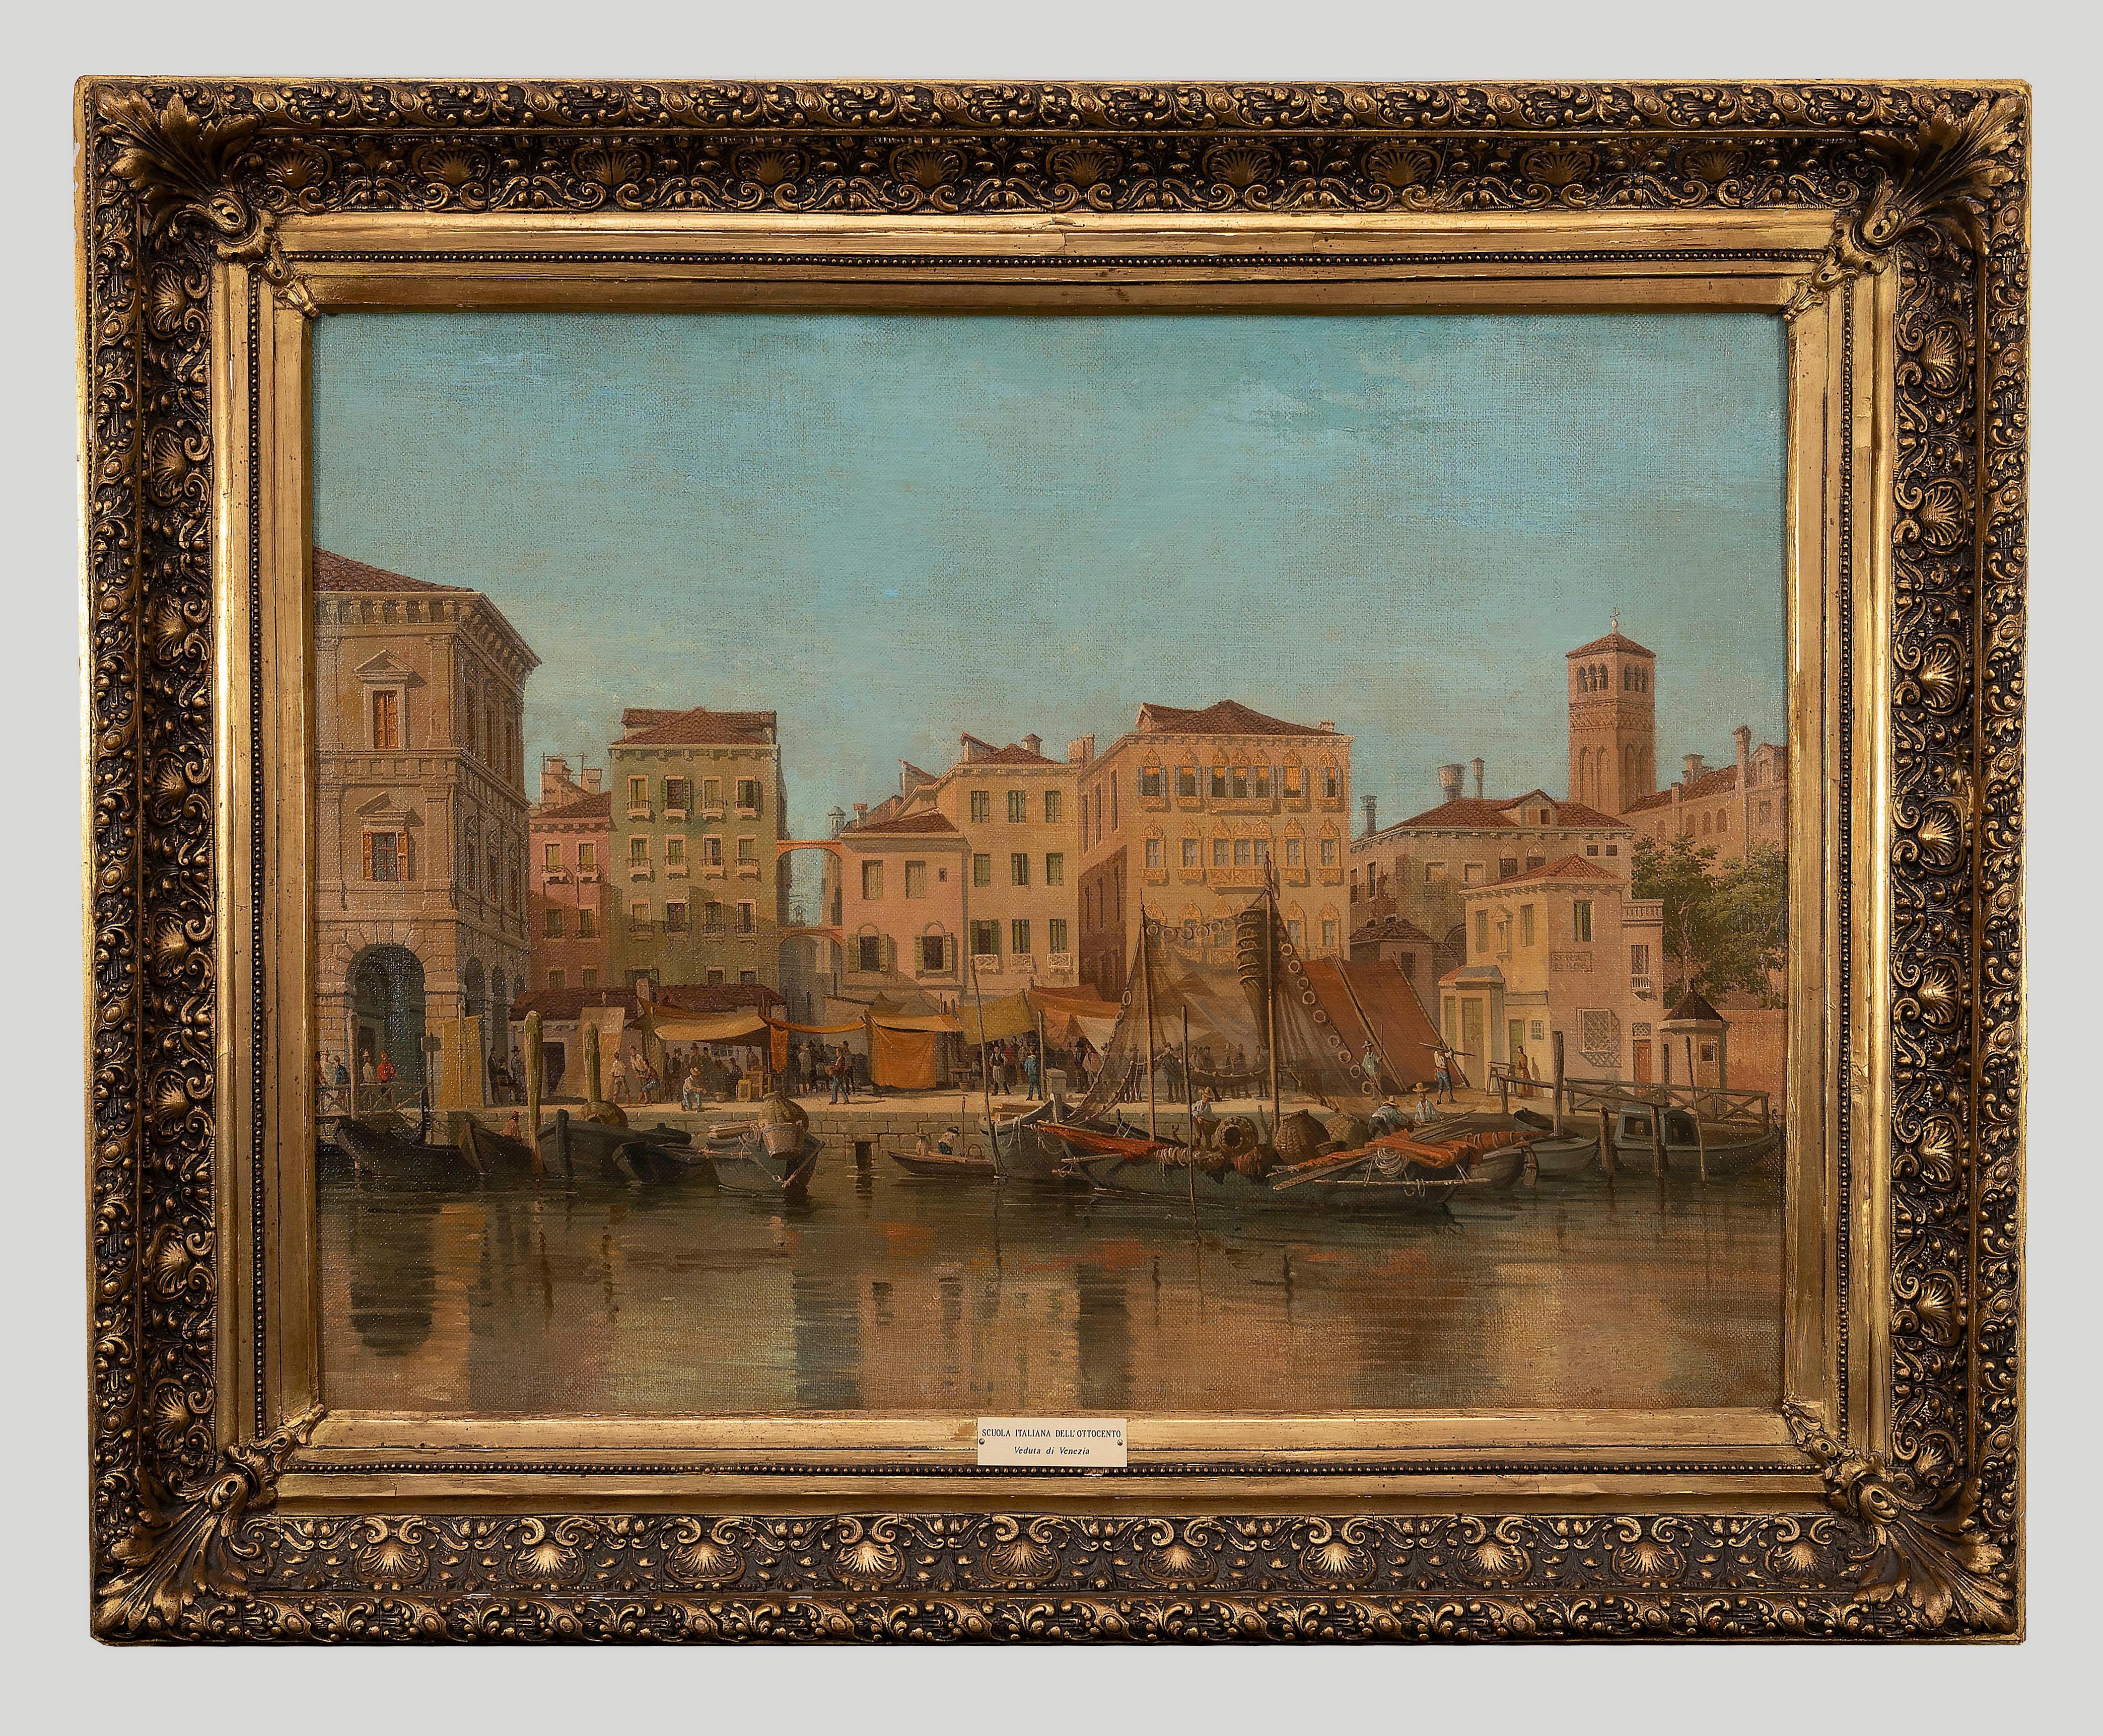 View of Venice - Original Oil on Canvas Late 19th Century